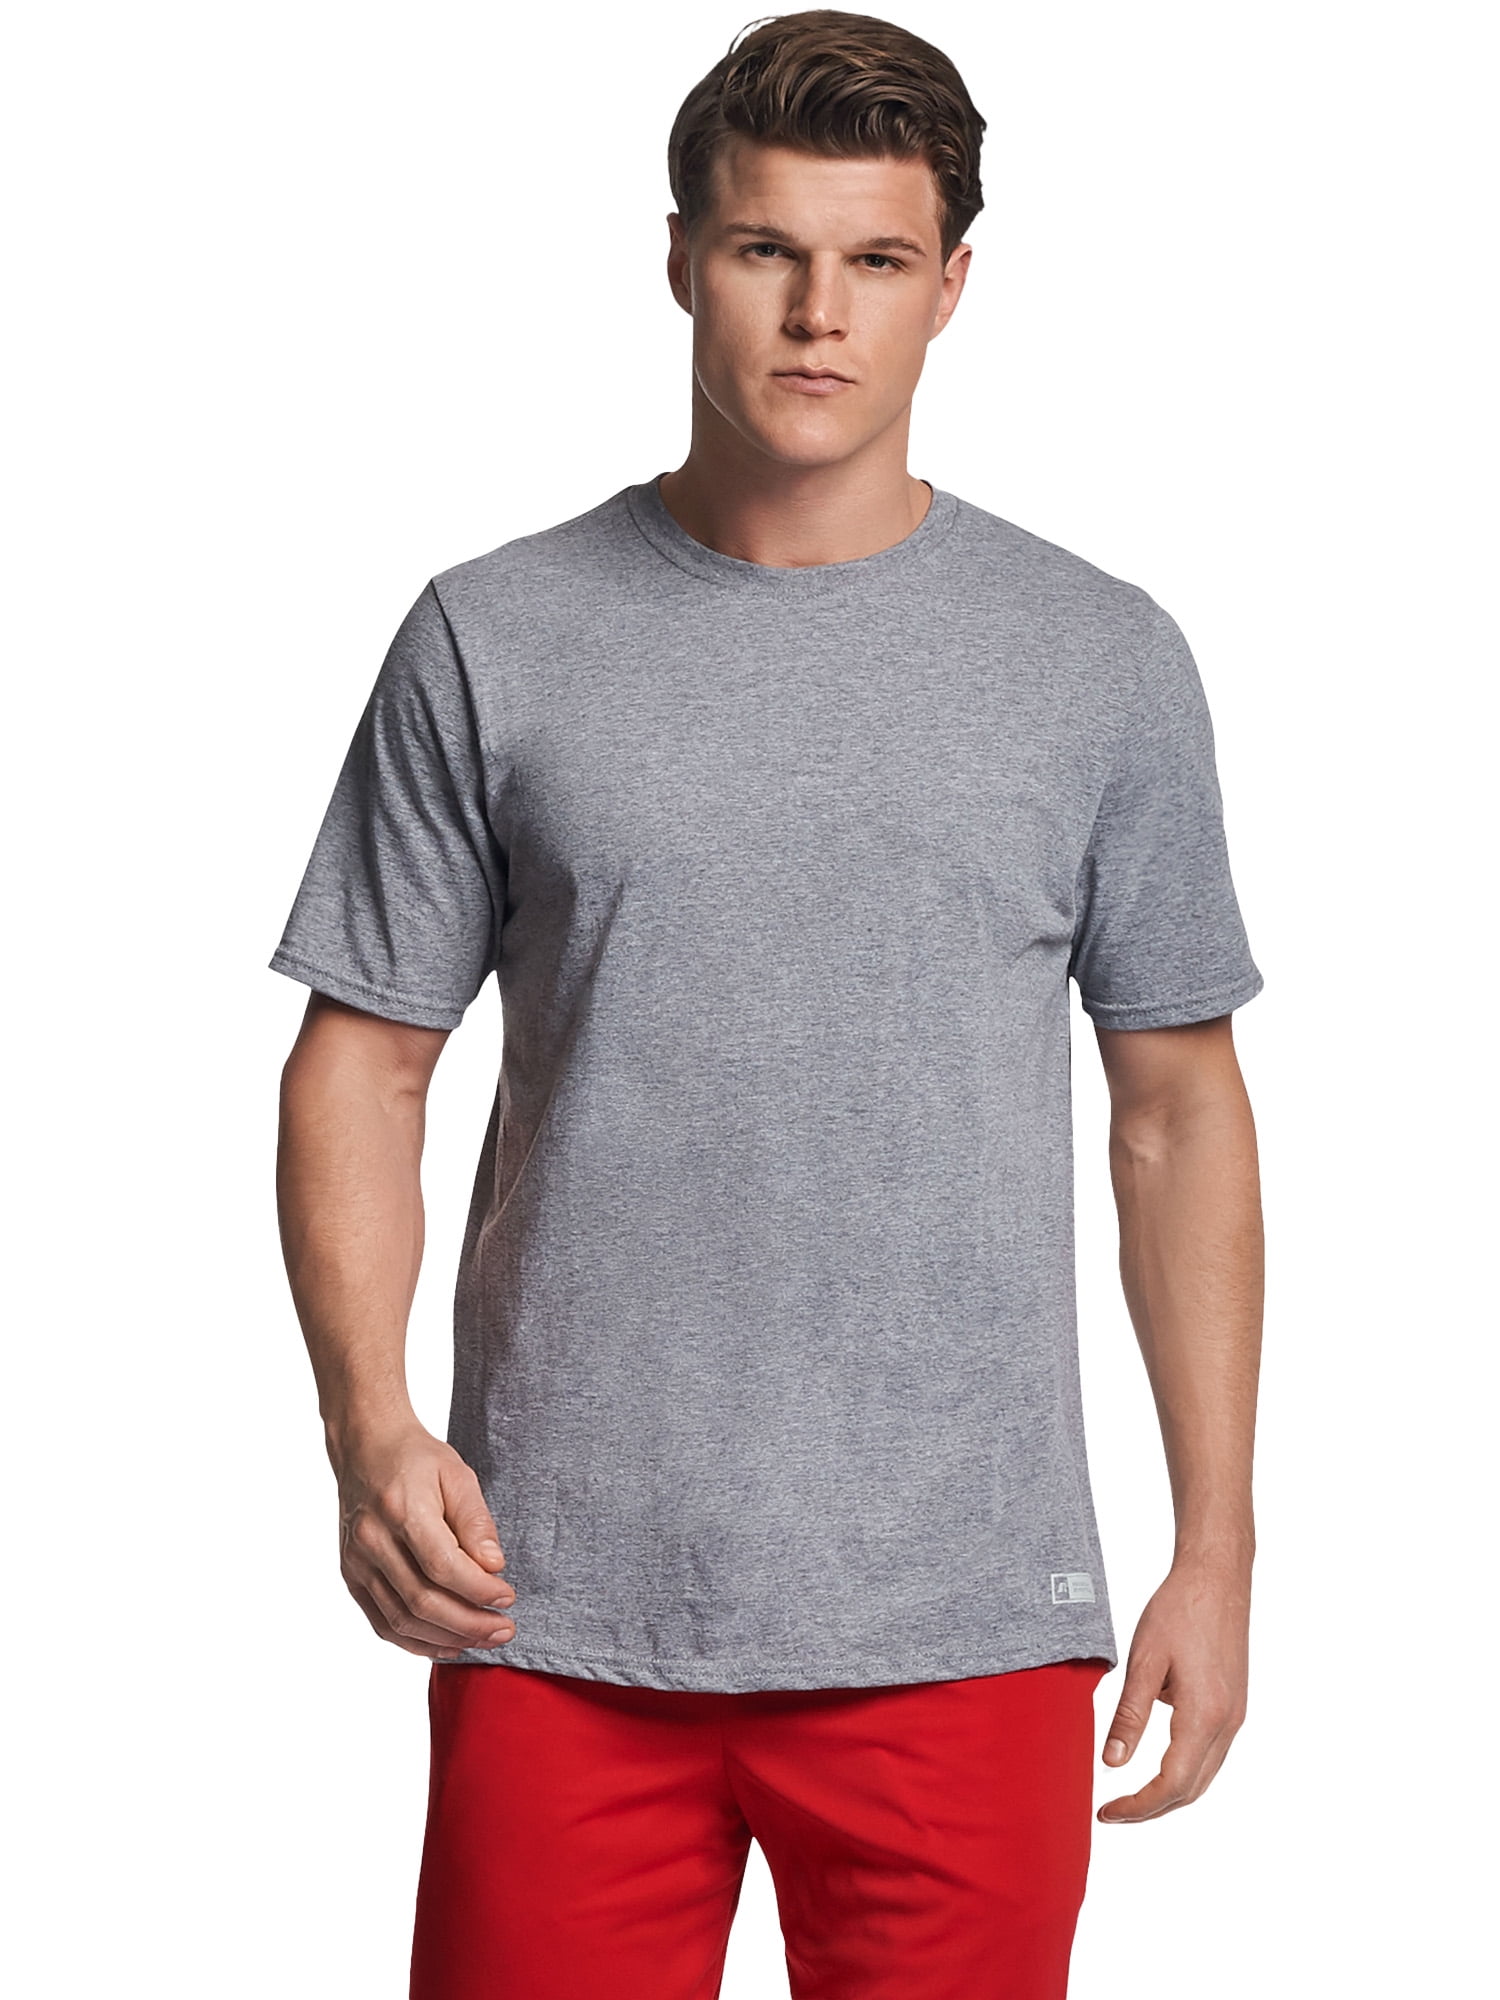 Russell Athletic Men's and Big Men's Cotton Performance Short Sleeve T ...